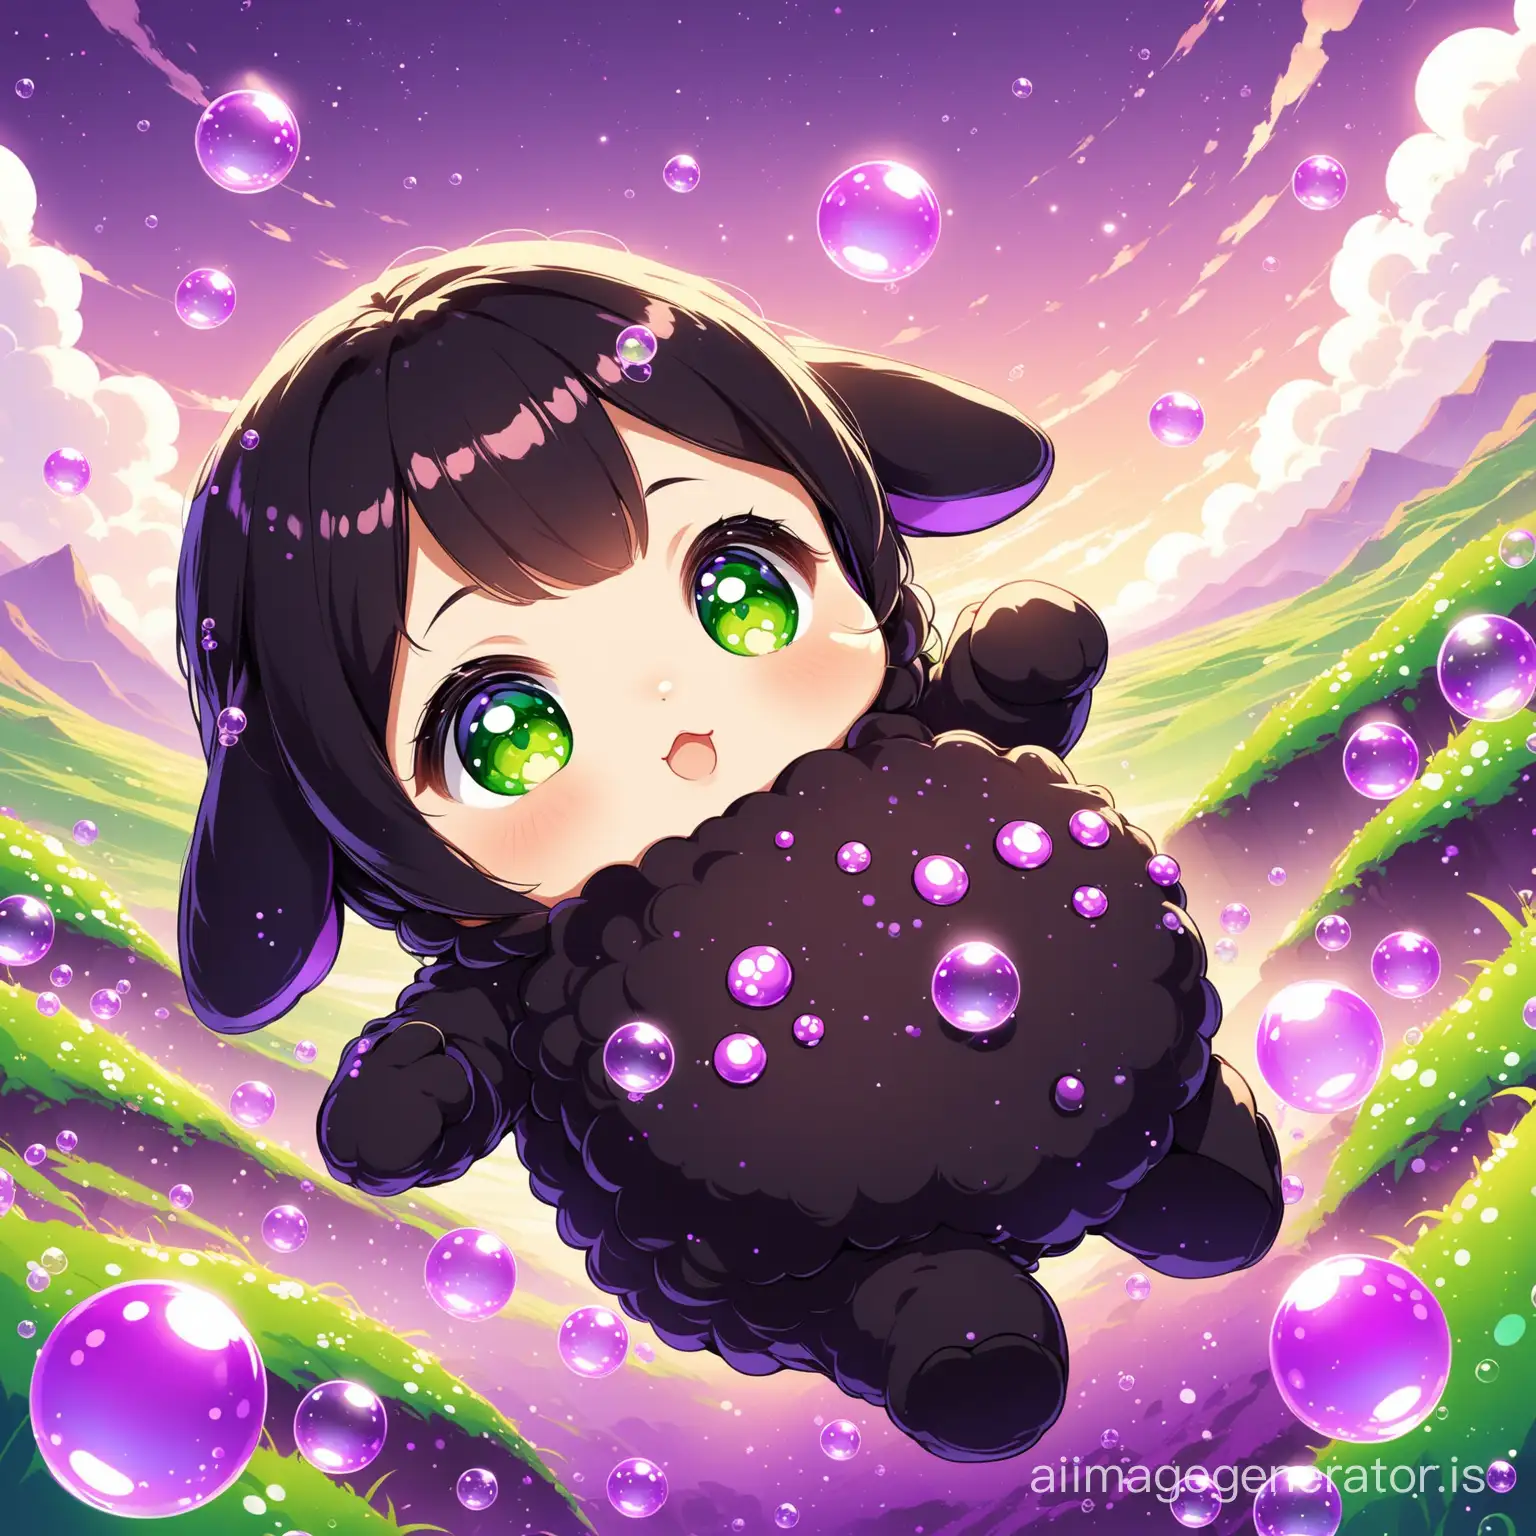 The baby is a small black cute cookie with green eyes walking in the land of purple Bubbles are scattered in the environment
Details are evident beautifully and with great precision